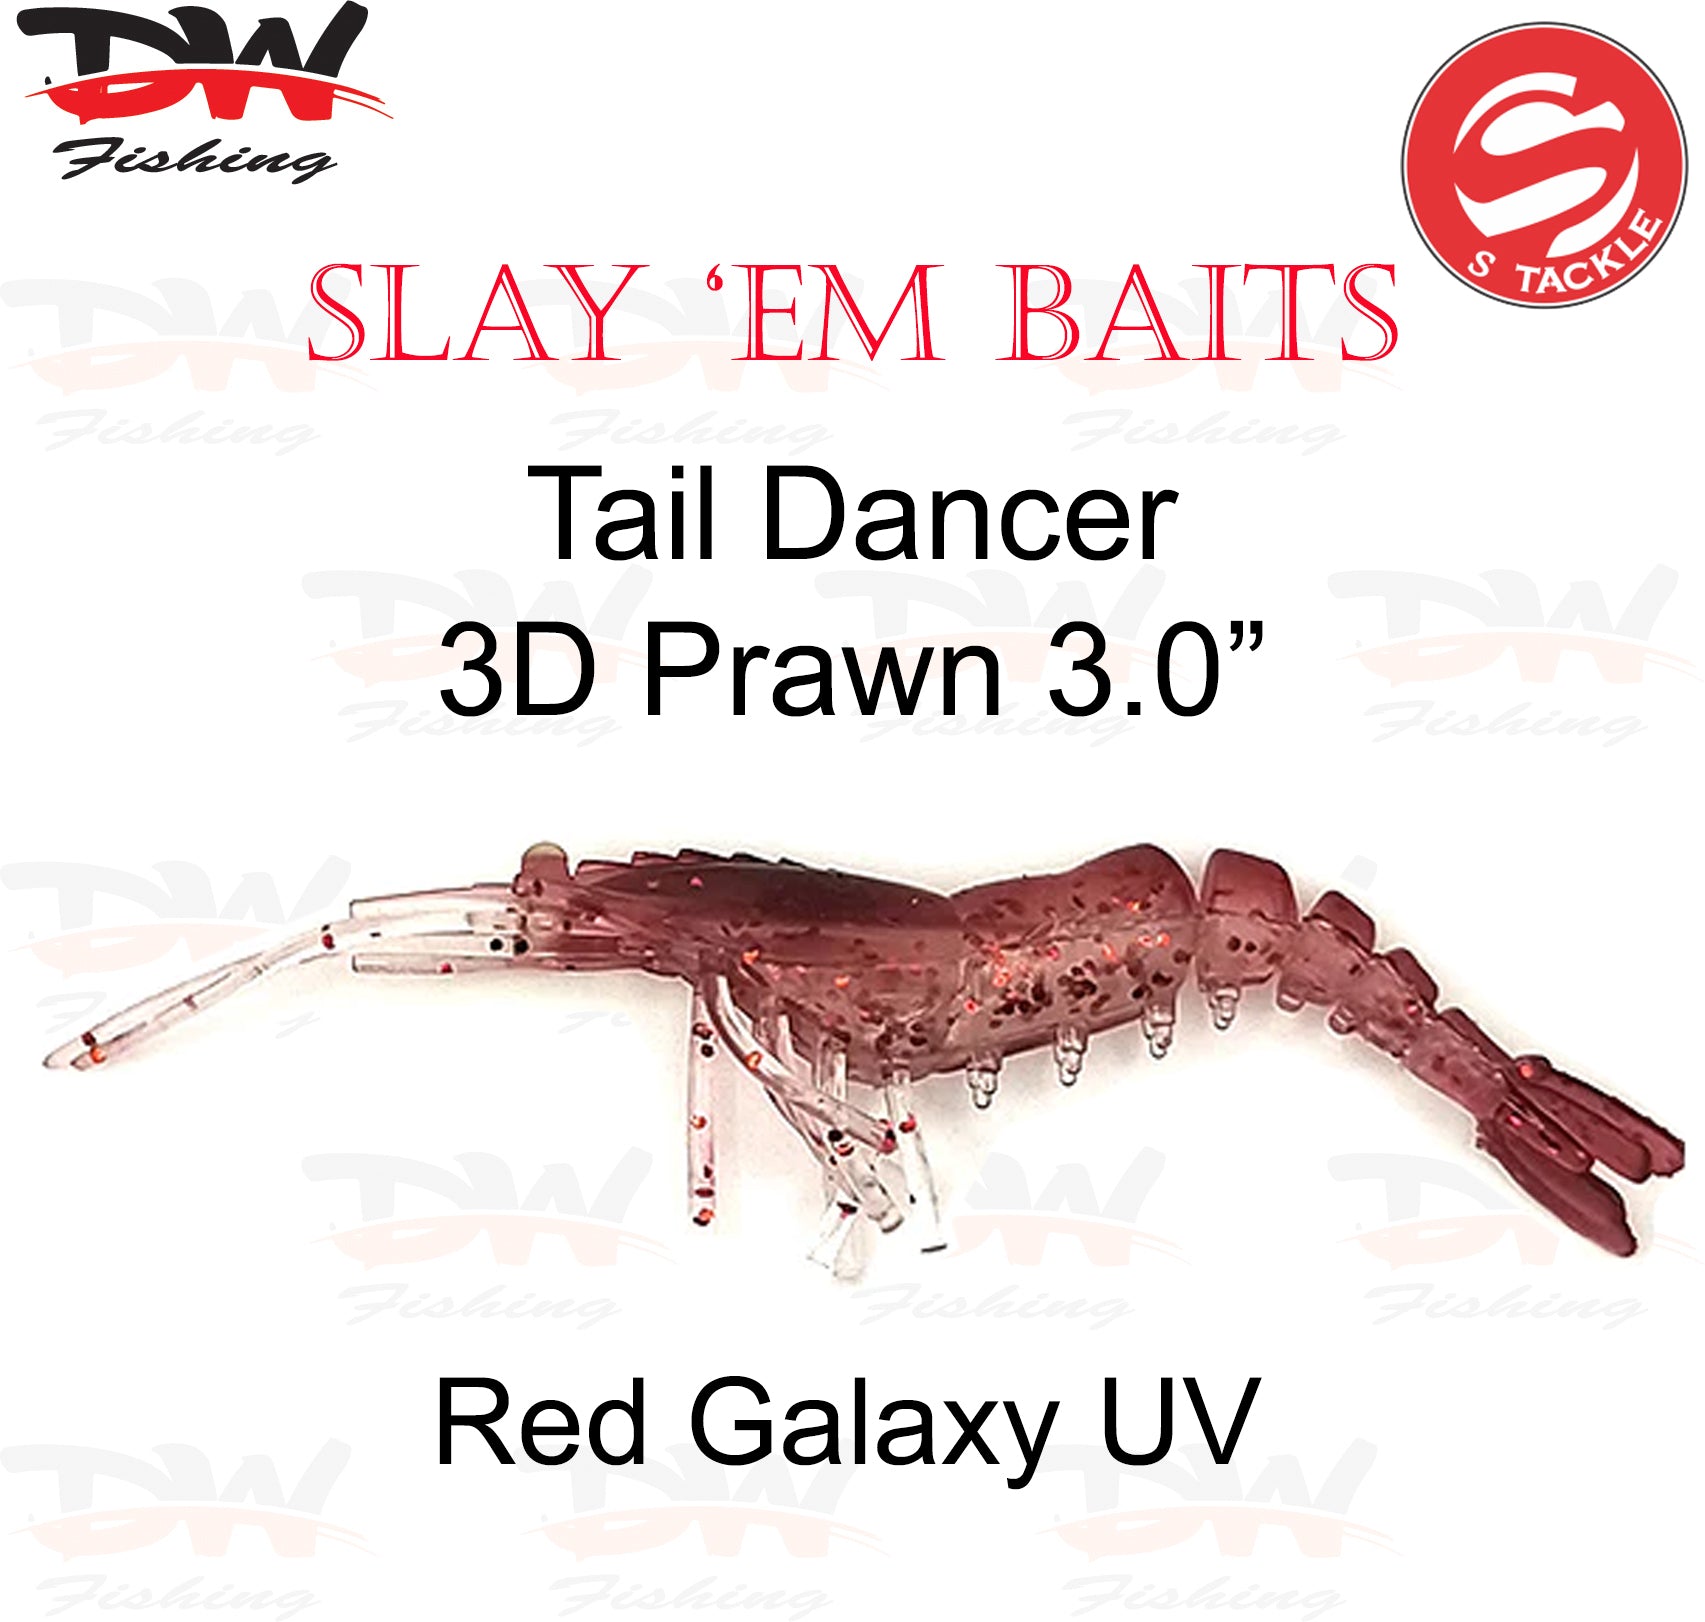 S Tackle 3D tail Dancer prawn lure 3.0 inch Imitation soft plastic lure Colour Red Galaxy UV